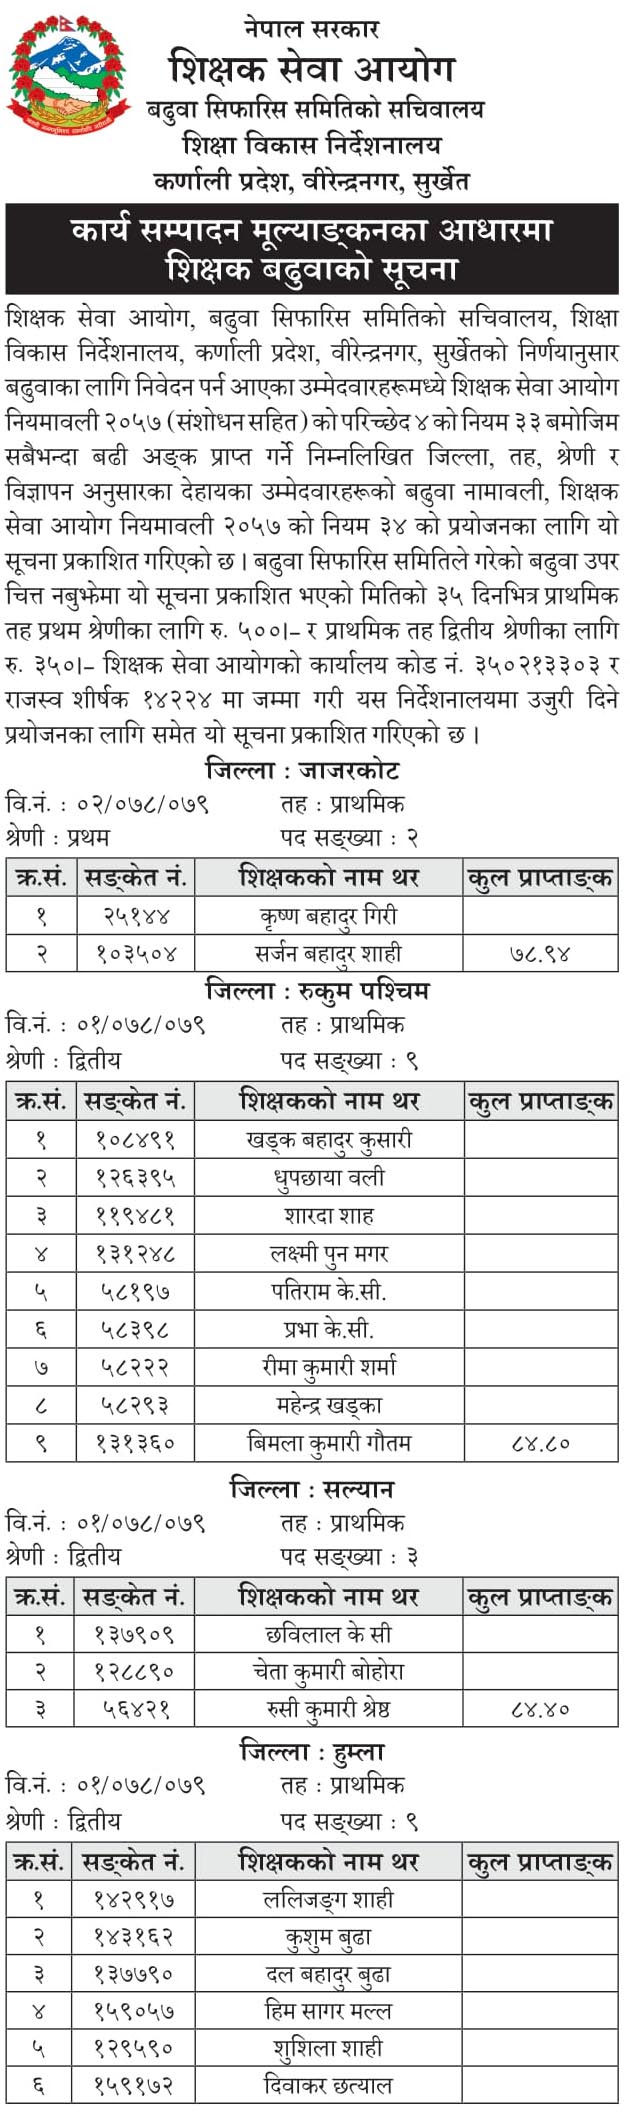 According to the decision of the Secretariat of the Teachers Service Commission Promotion Recommendation Committee, Directorate of Education Development, Karnali Province, Birendranagar, Surkhet, among the candidates who have received applications for promotion, according to Rule 33 of Paragraph 4 of the Teachers Service Commission Regulations 2057 (with amendments), the following district-wise The promotion list of candidates has been published.